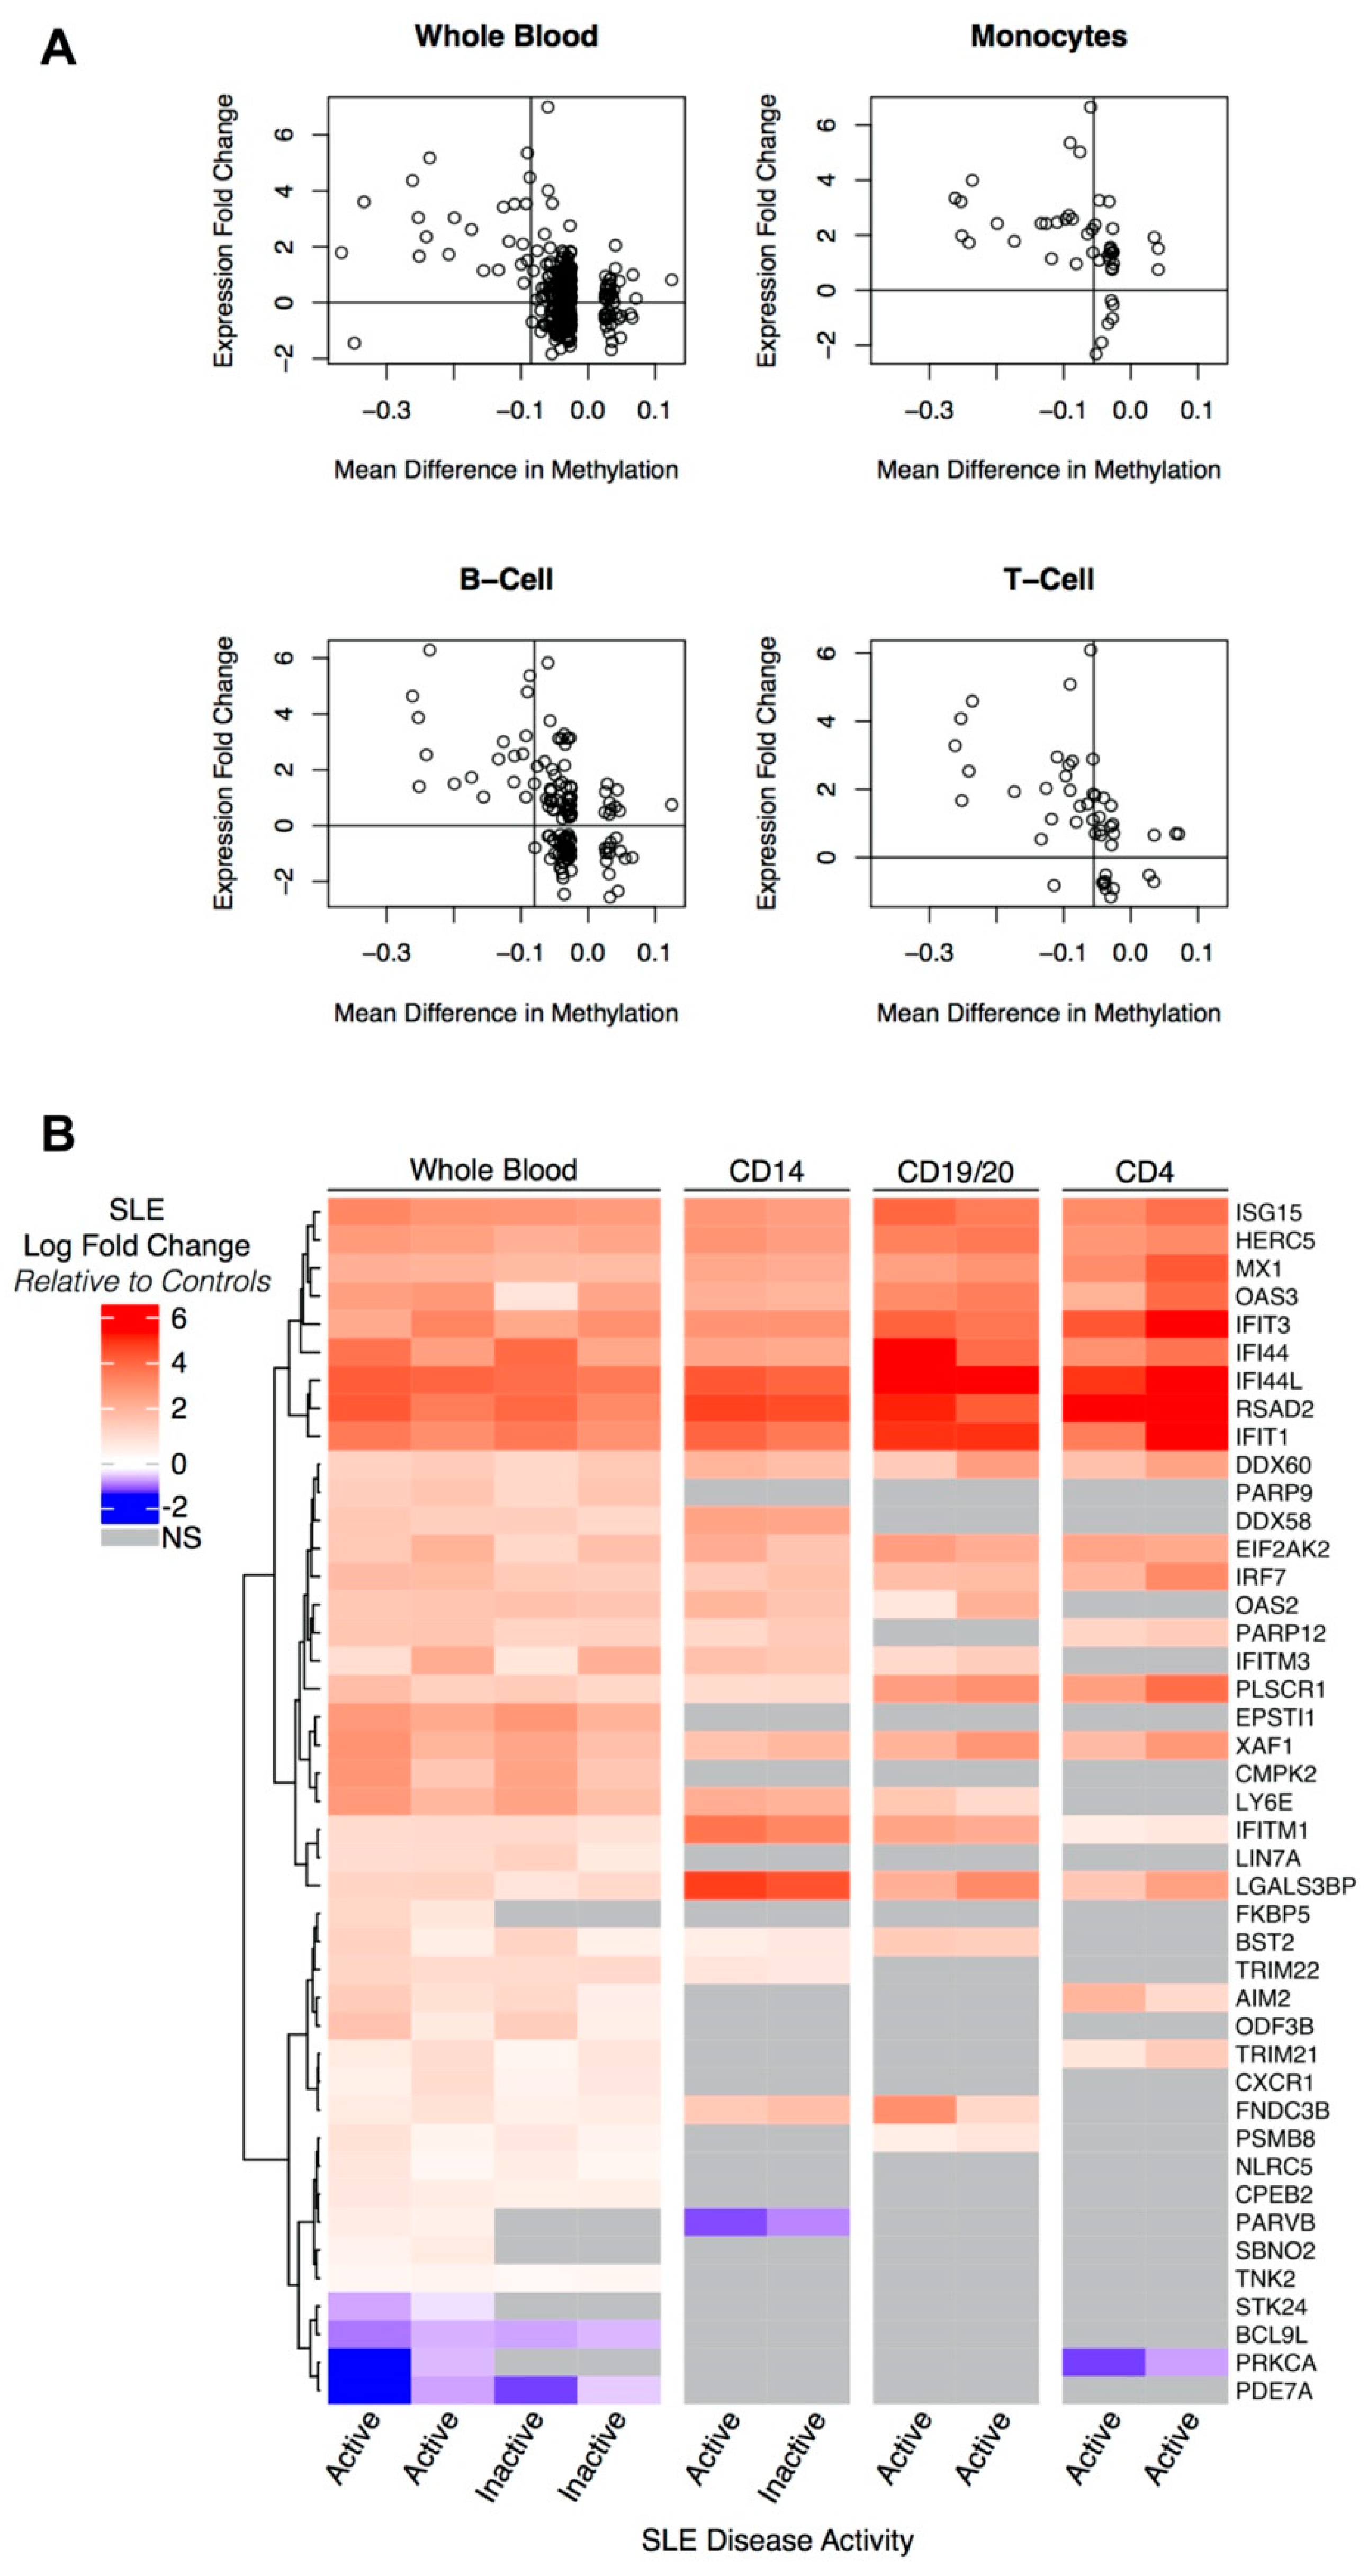 Genes Free Full Text Nucleic Acid Sensing And Interferon Inducible Pathways Show Differential Methylation In Mz Twins Discordant For Lupus And Overexpression In Independent Lupus Samples Implications For Pathogenic Mechanism And Drug Targeting